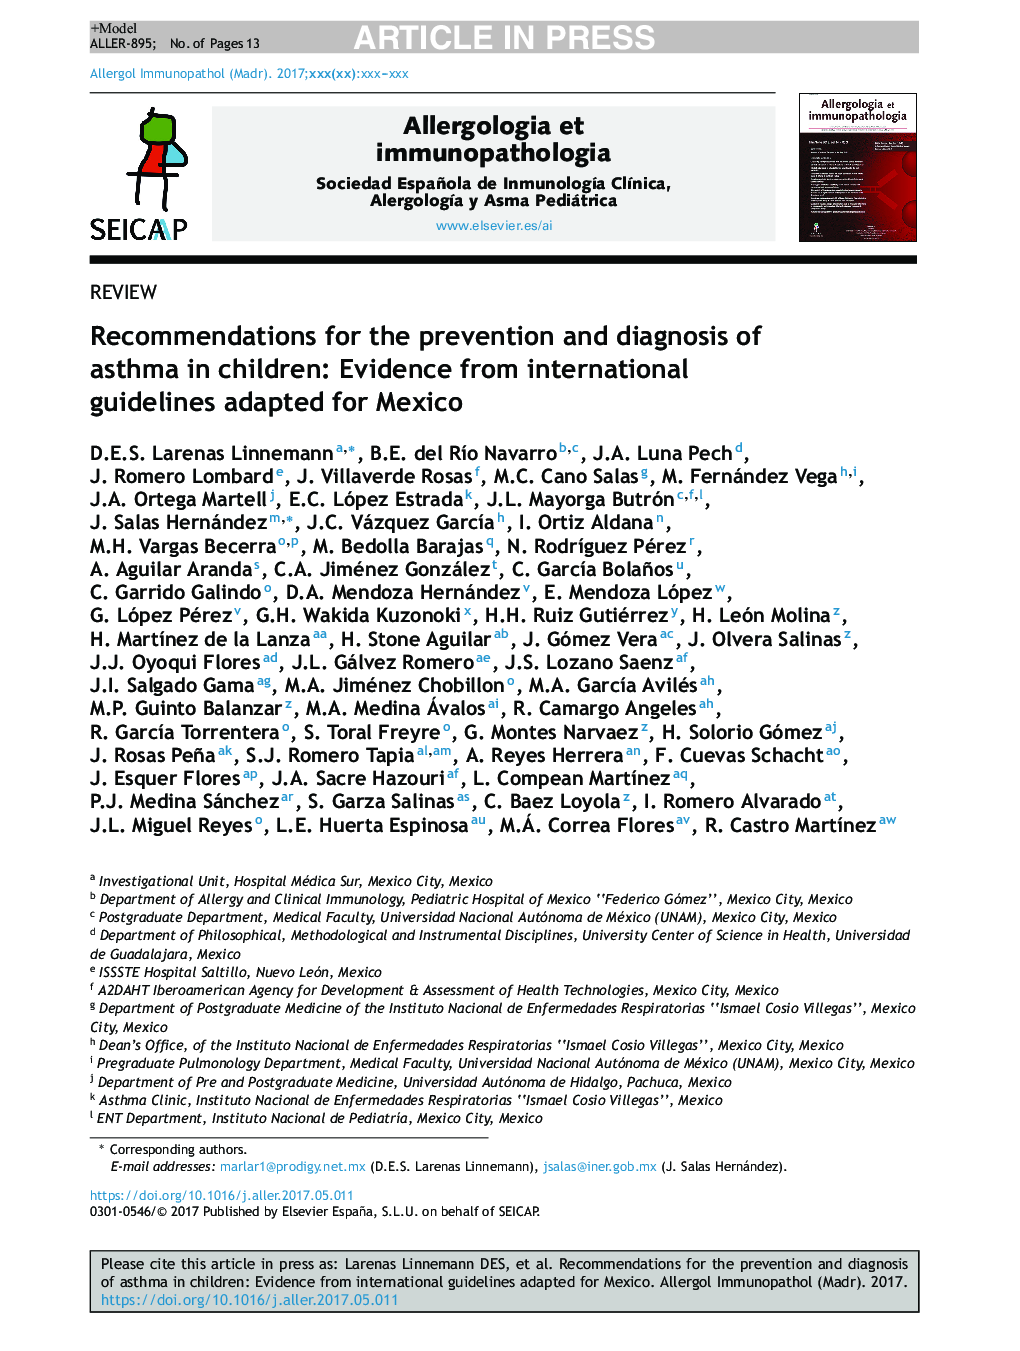 Recommendations for the prevention and diagnosis of asthma in children: Evidence from international guidelines adapted for Mexico